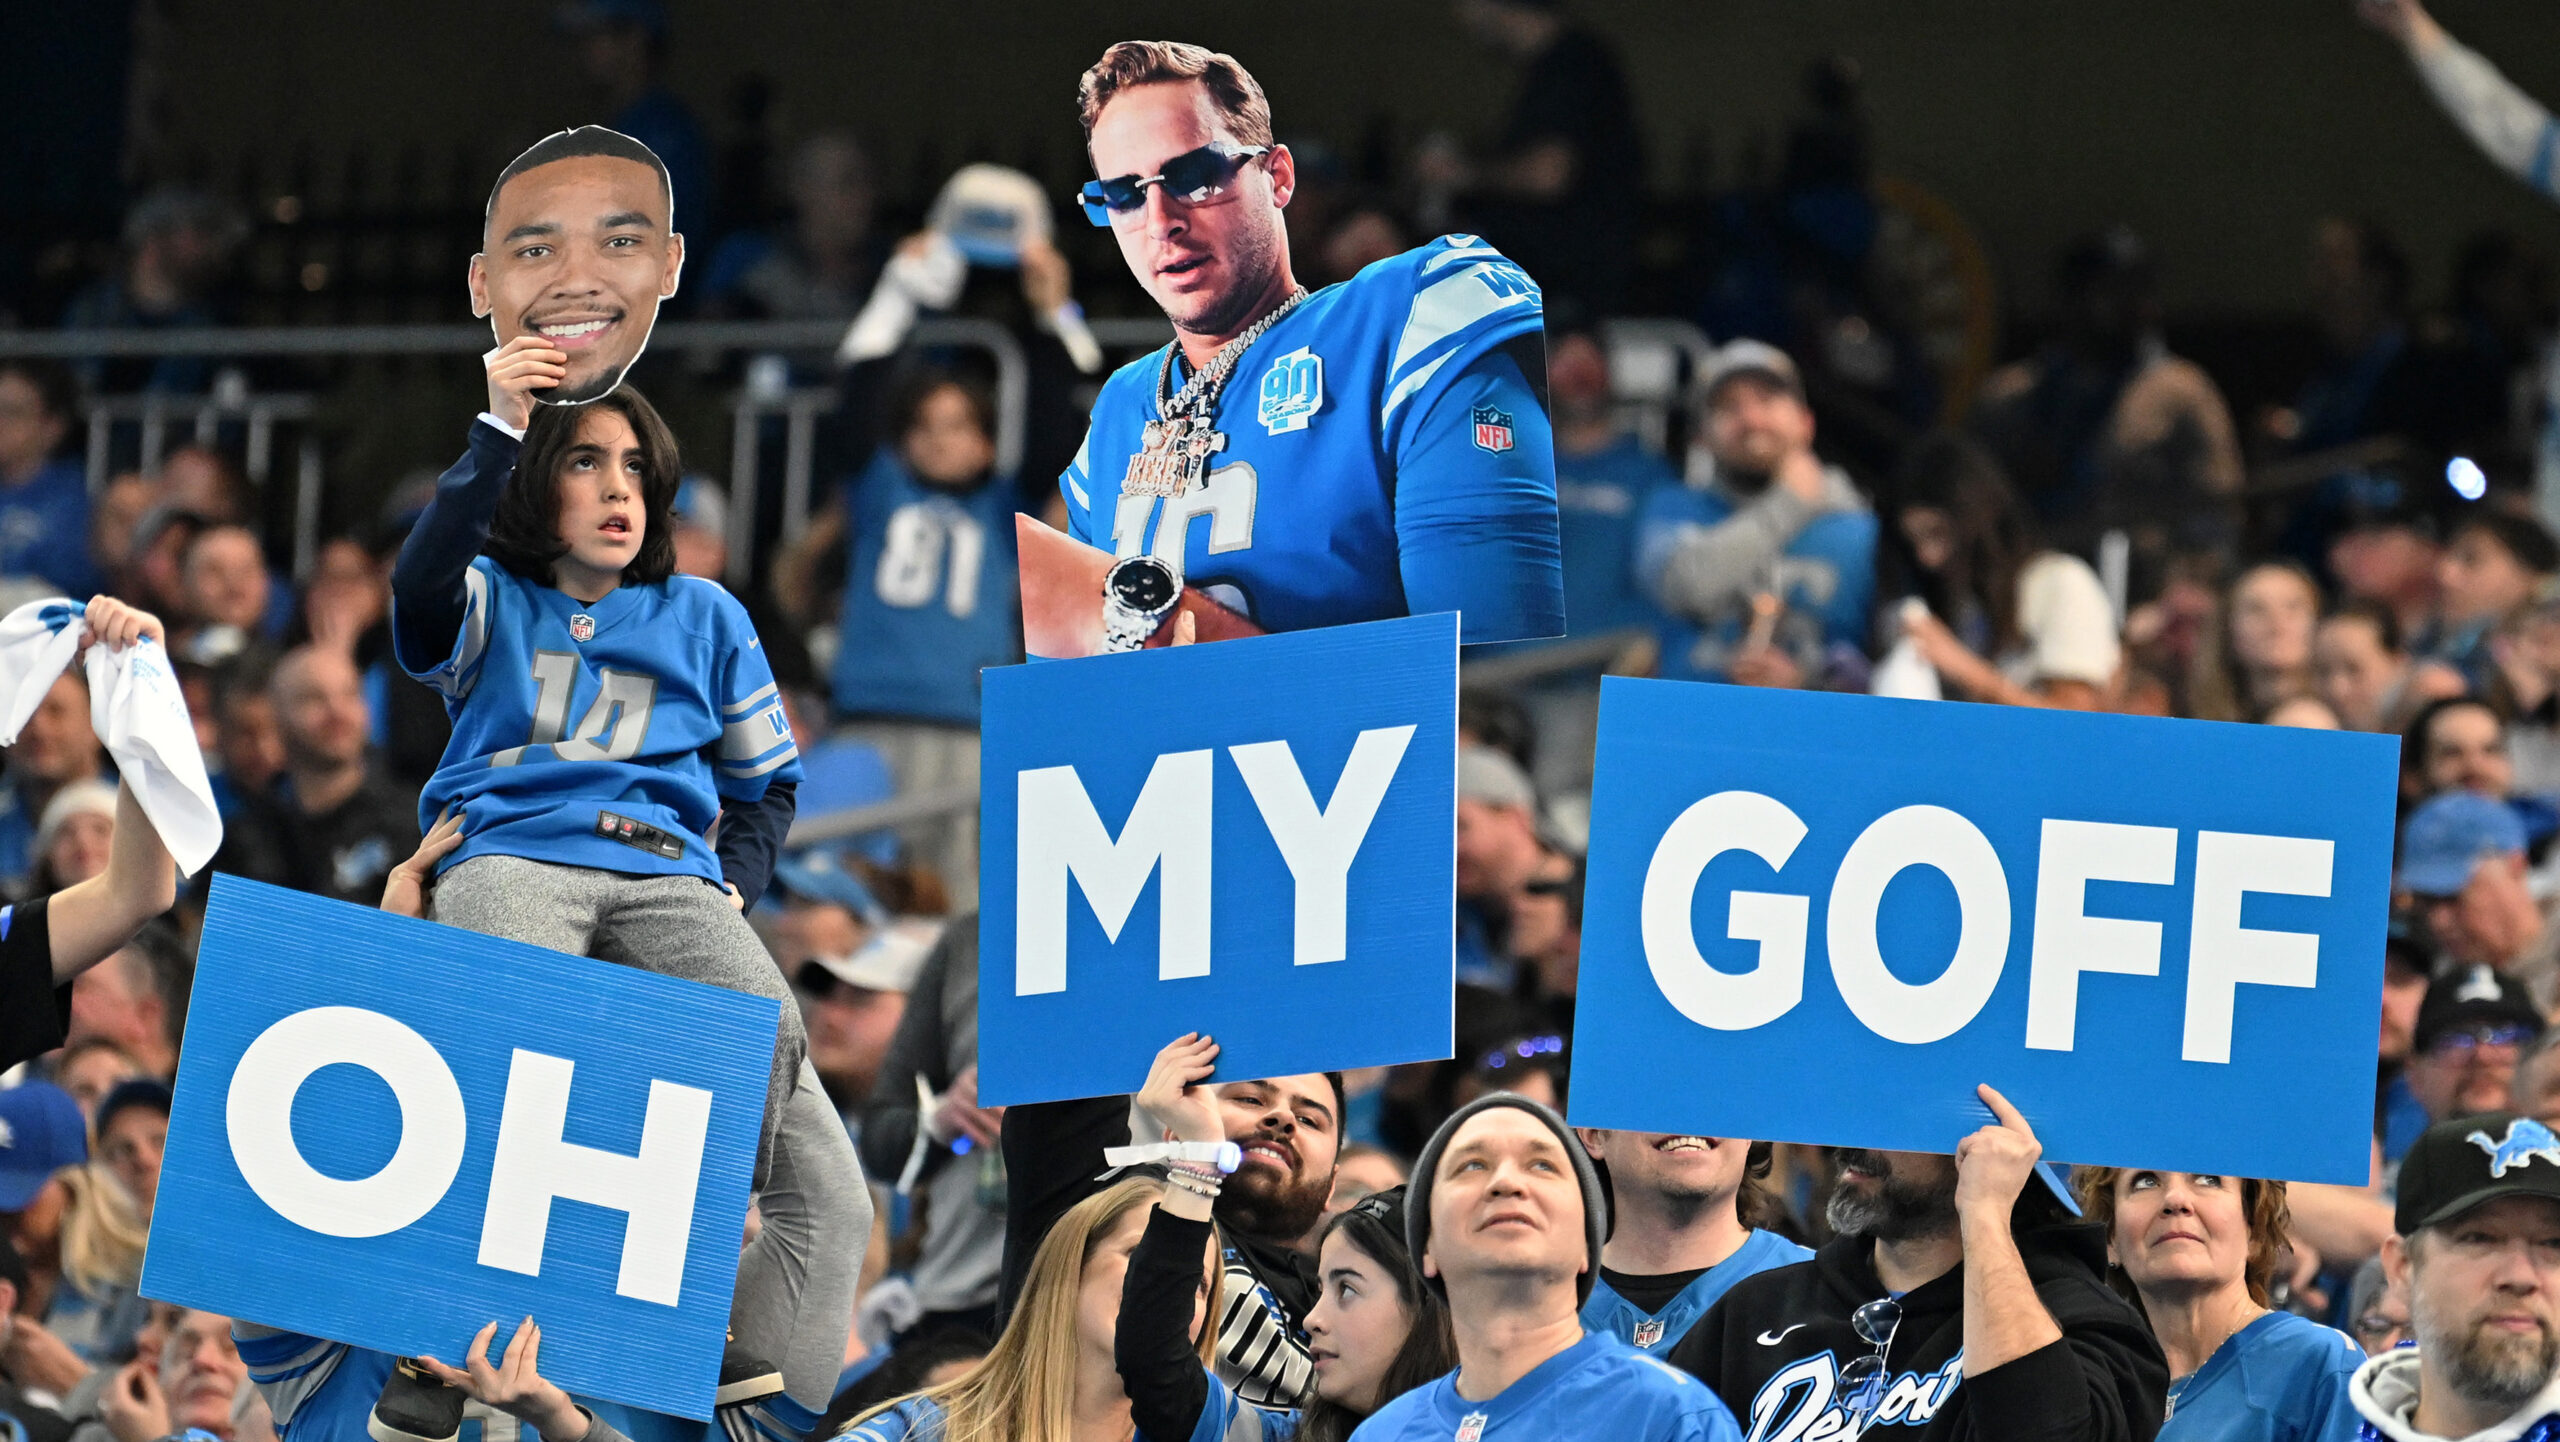 Detroit Lions fans hold up signs saying "Oh my Goff"